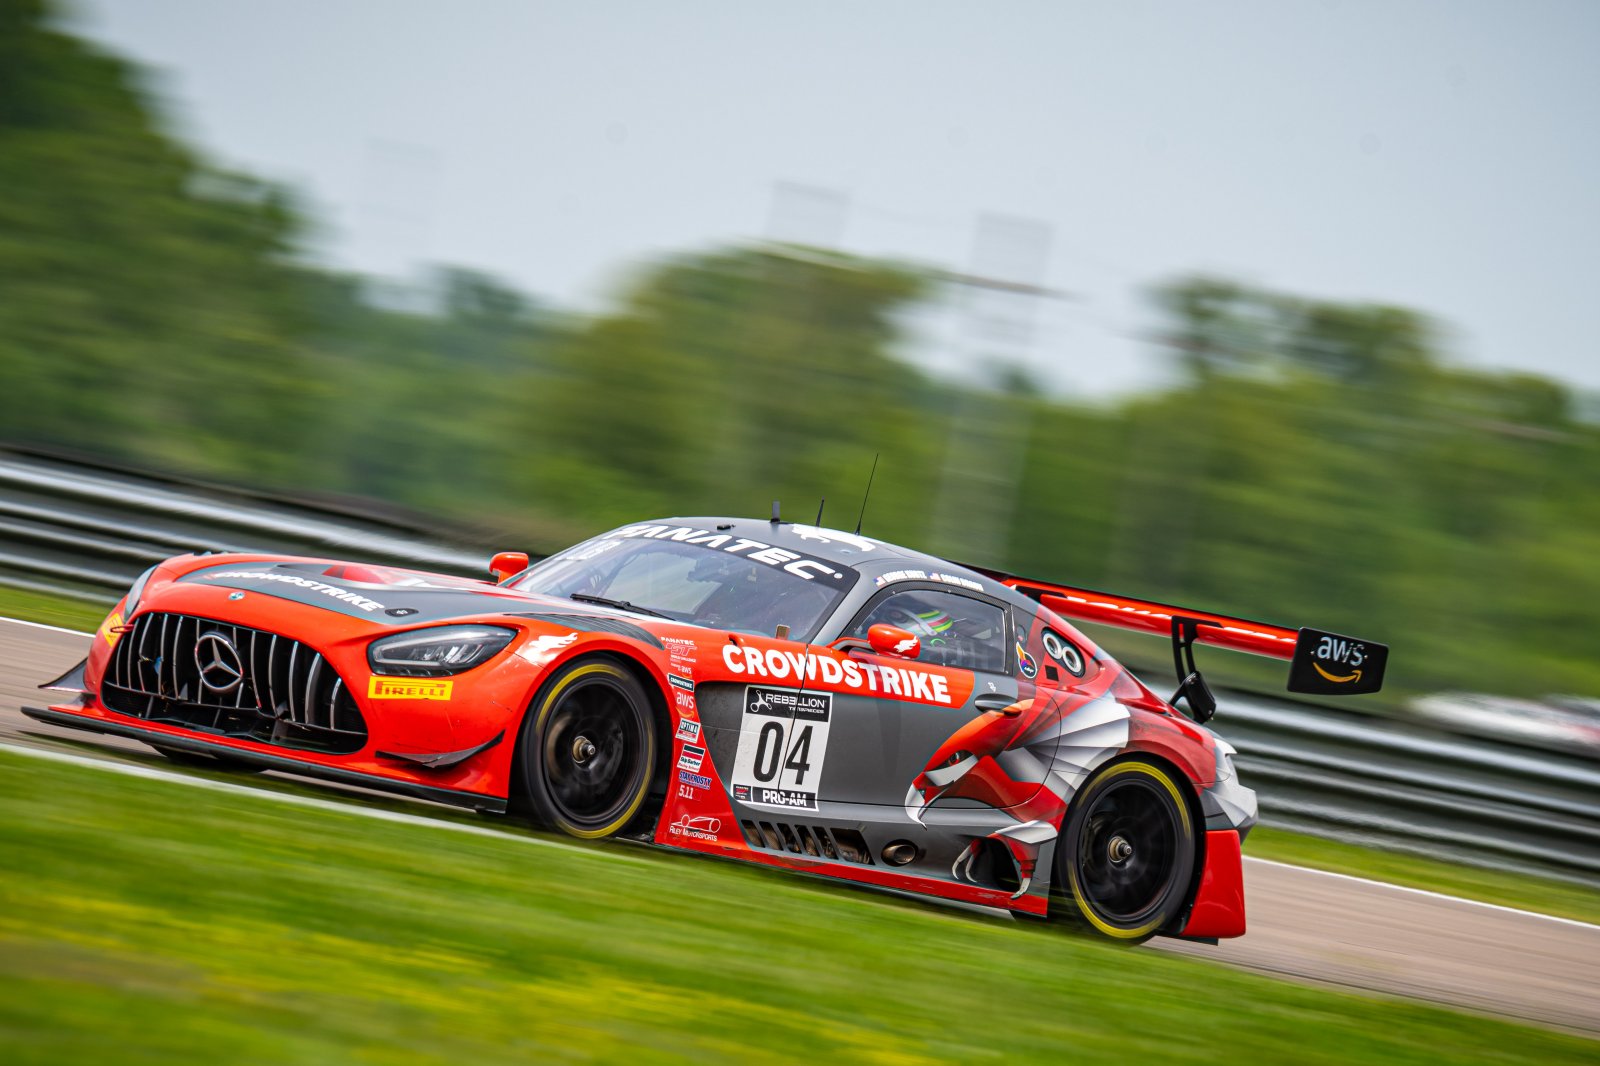 CrowdStrike Going for Another WIN at VIR